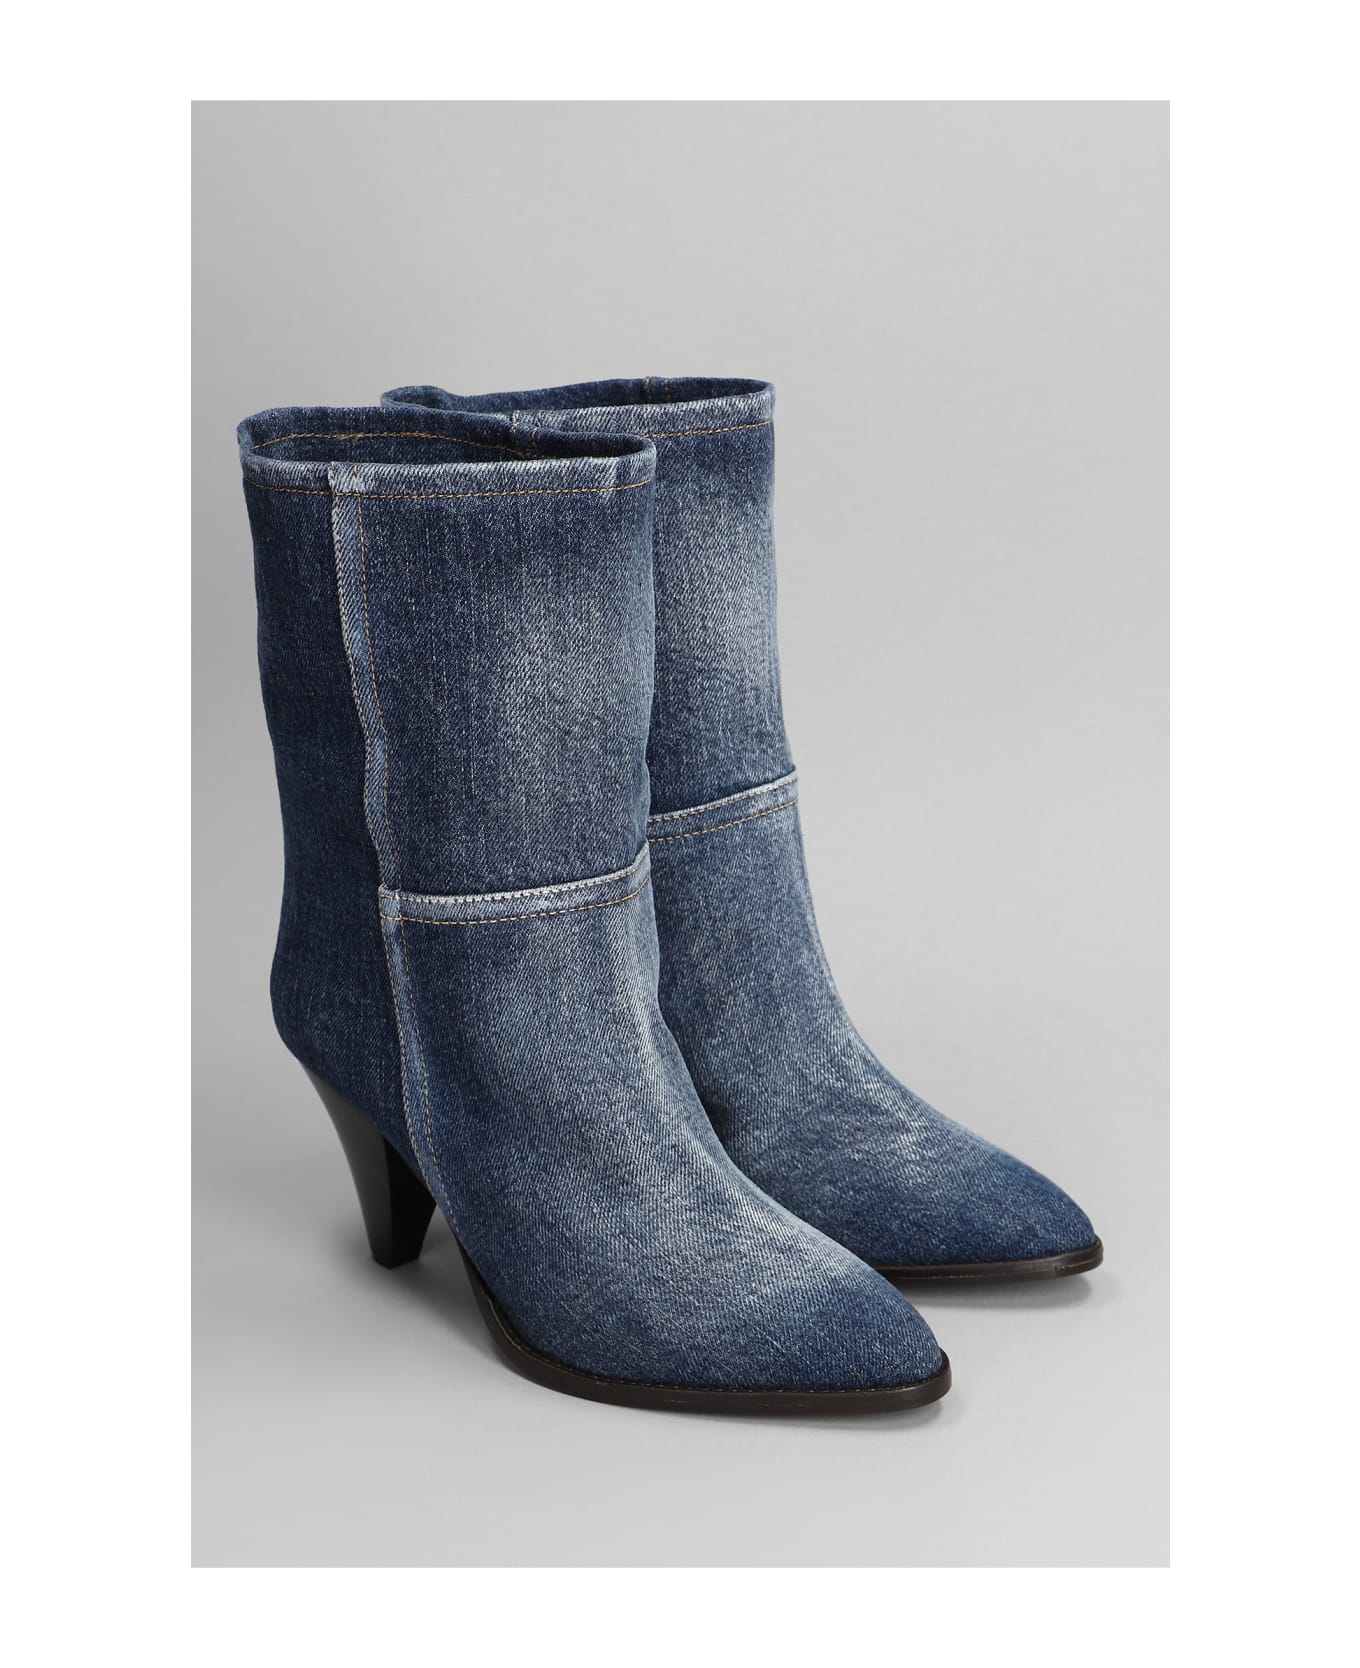 Isabel Marant Rouxa High Heels Ankle Boots - WASHED BLUE ブーツ